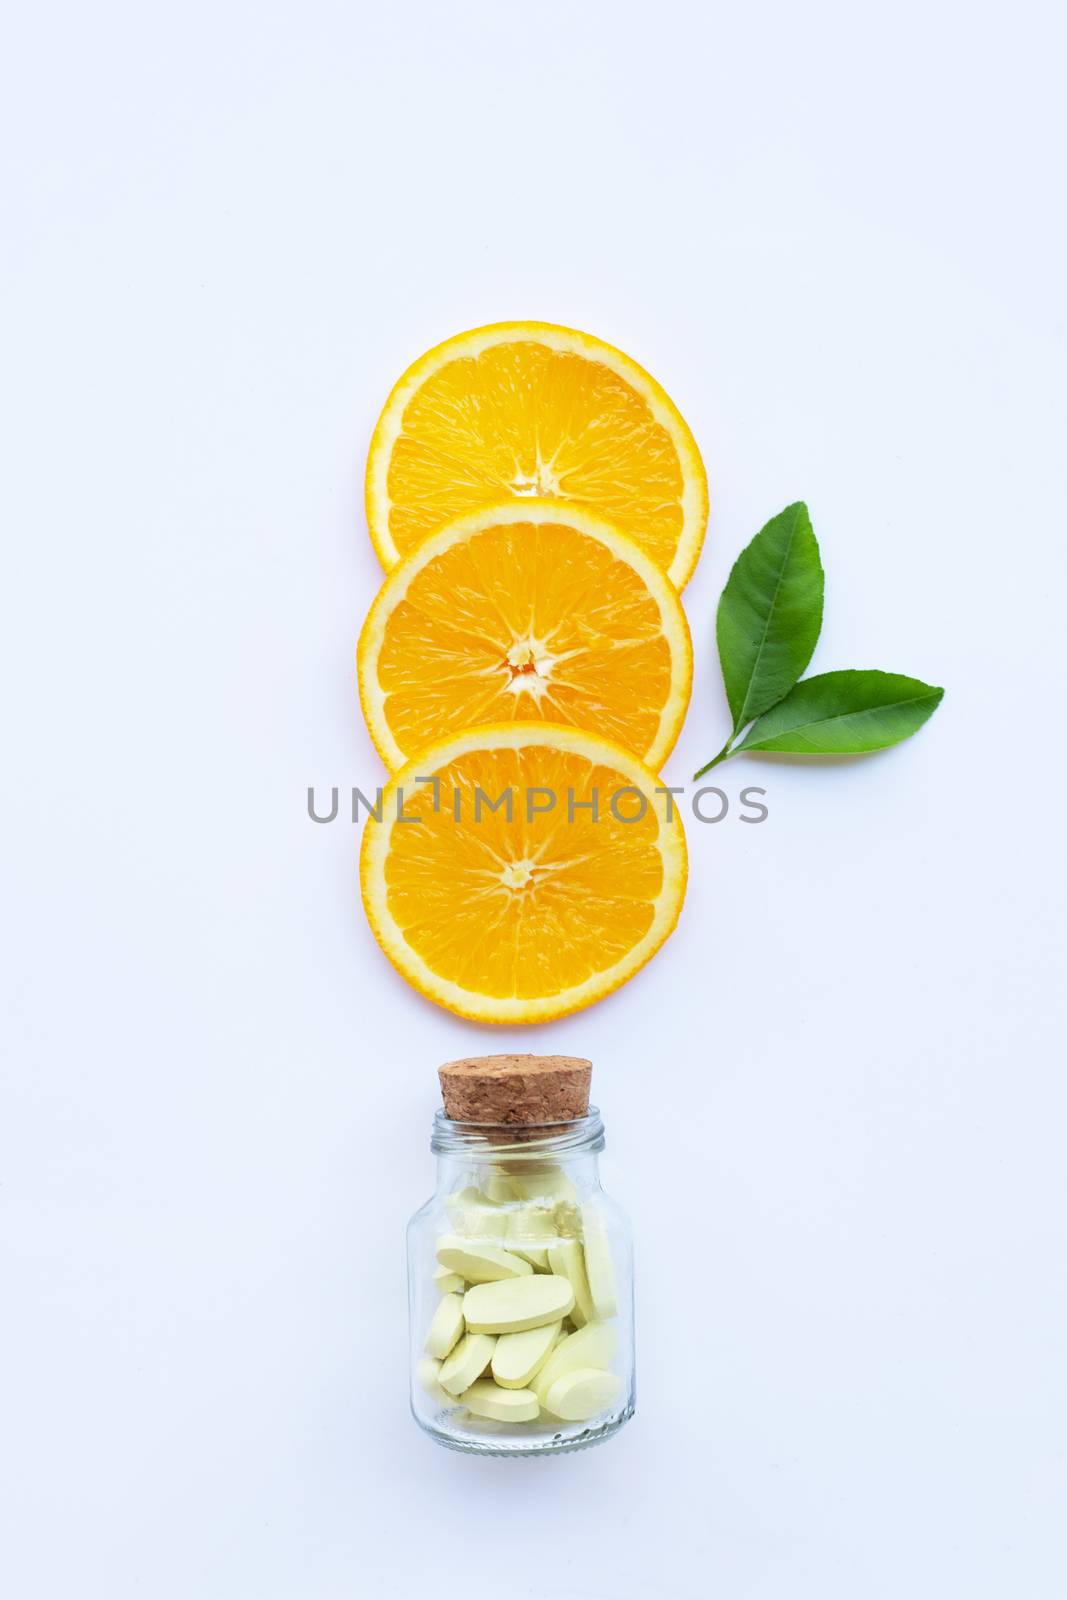 Vitamin C bottle and pills with orange fruit on white. by Bowonpat